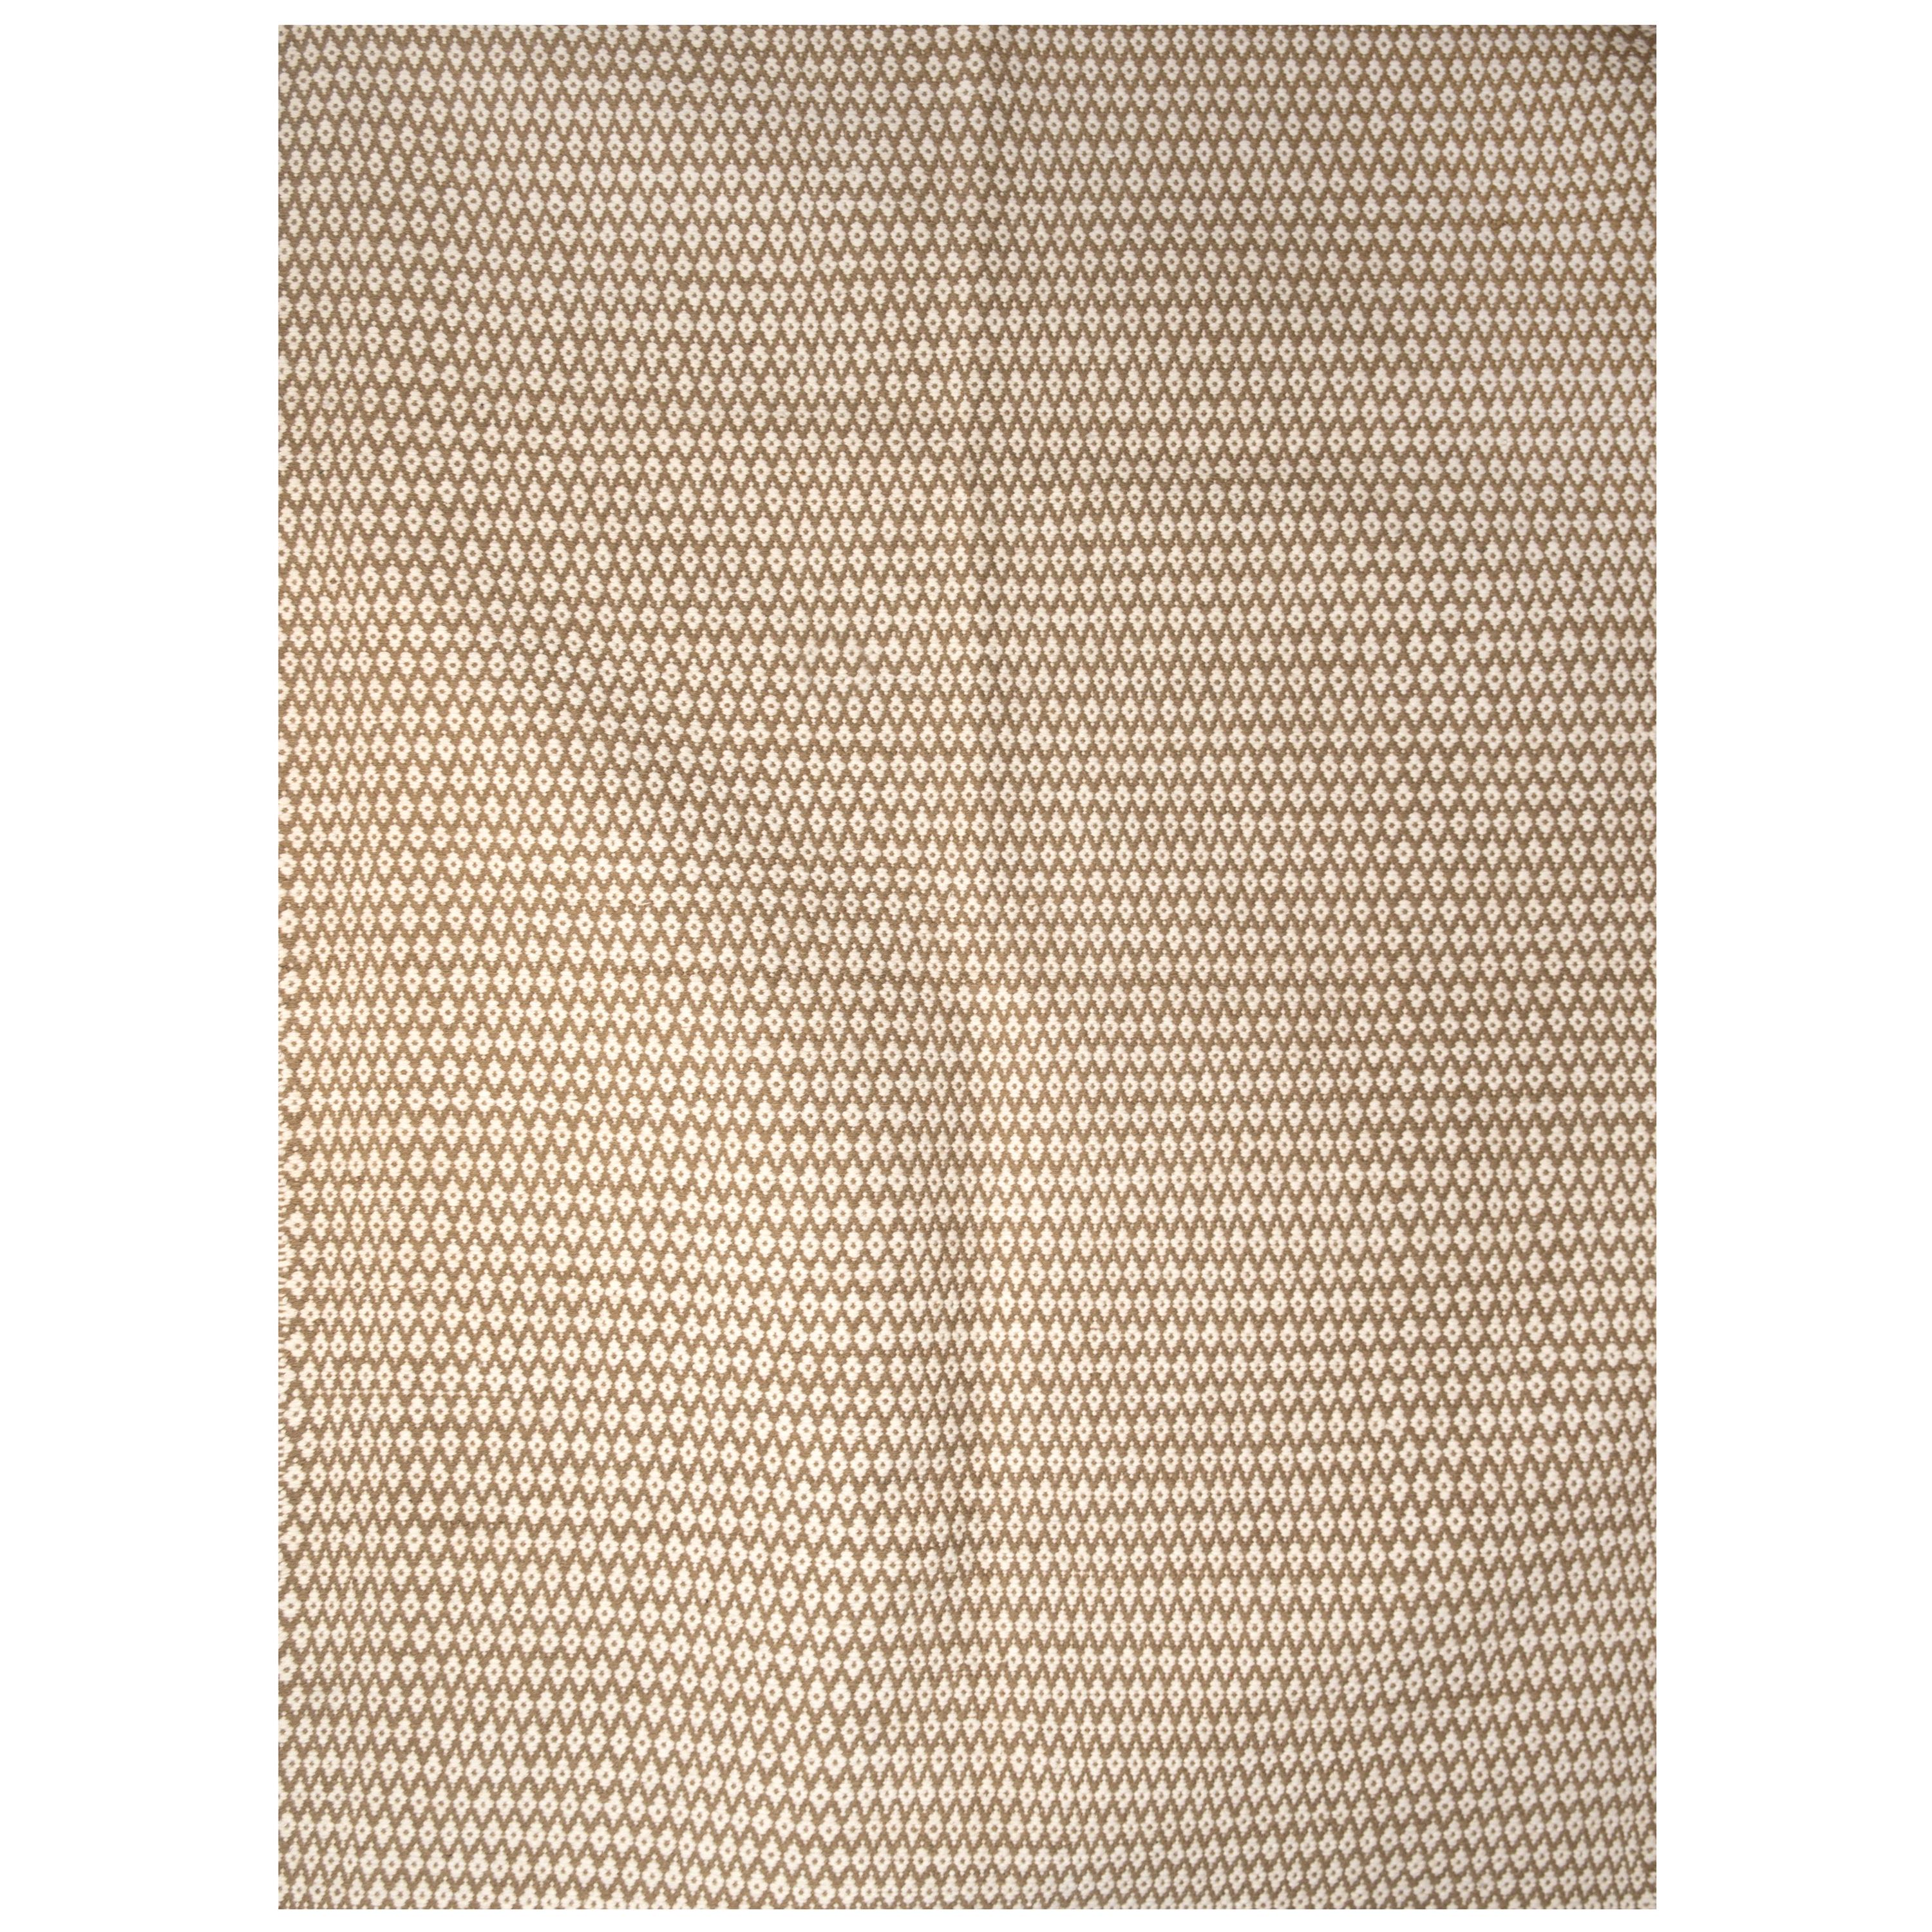 Modern Handwoven Flat-Weave Wool Paddle Dhurrie Rug in Beige&White Small Pattern